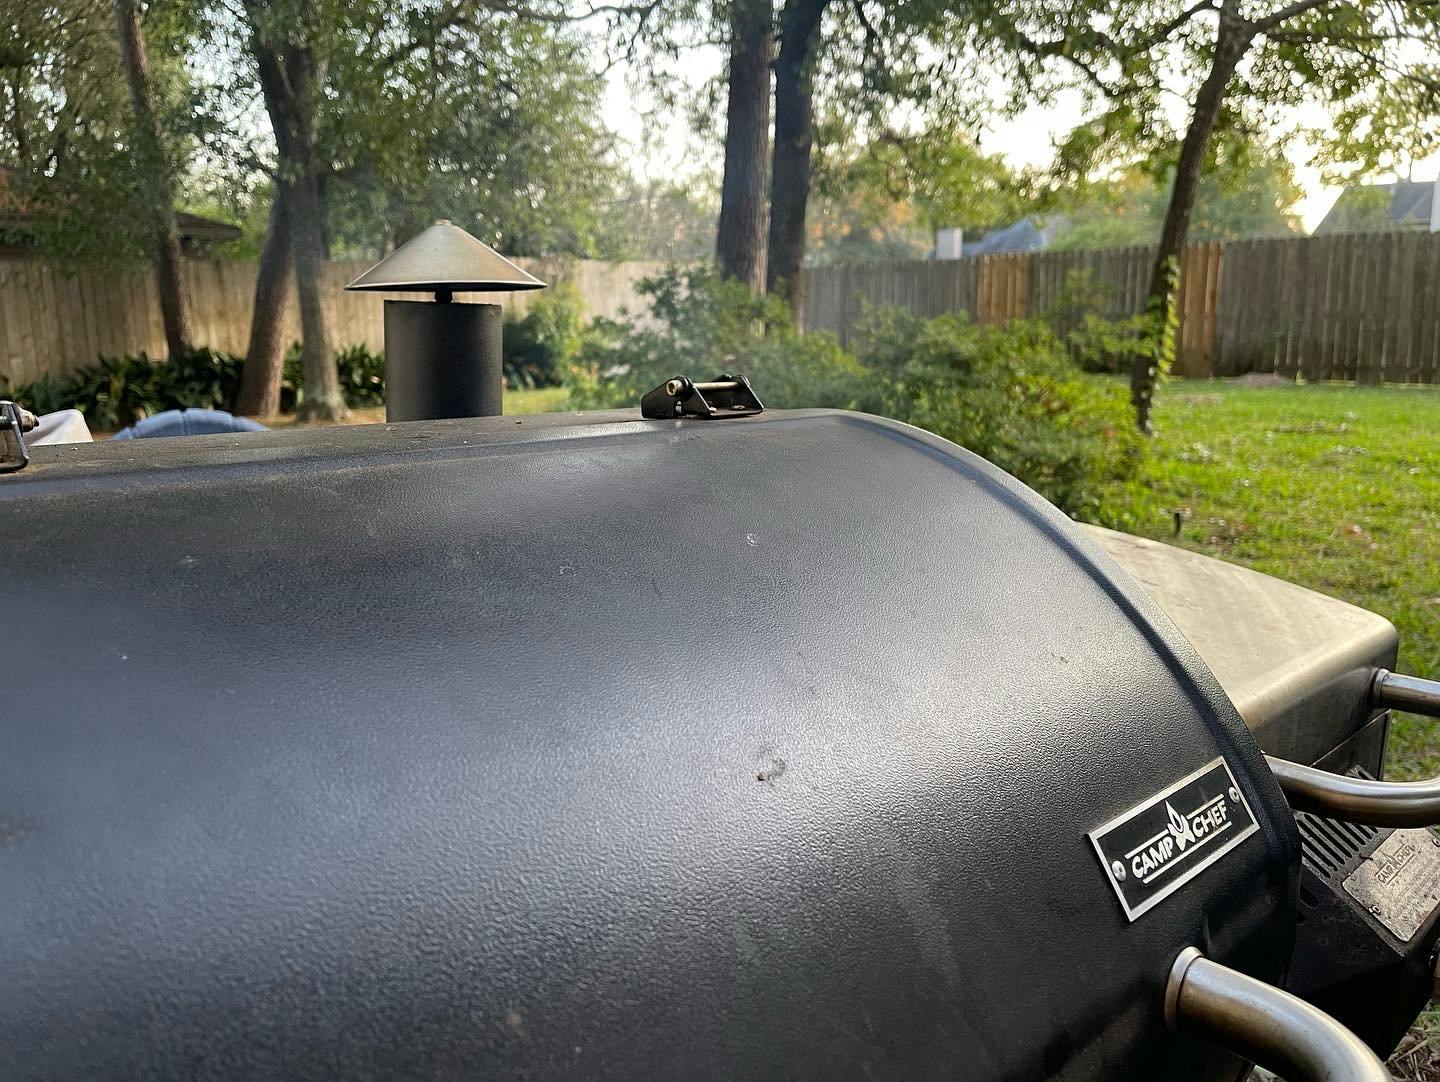 Camp Chef SmokePro DLX Pellet Grill Review: Pro-Grade Features